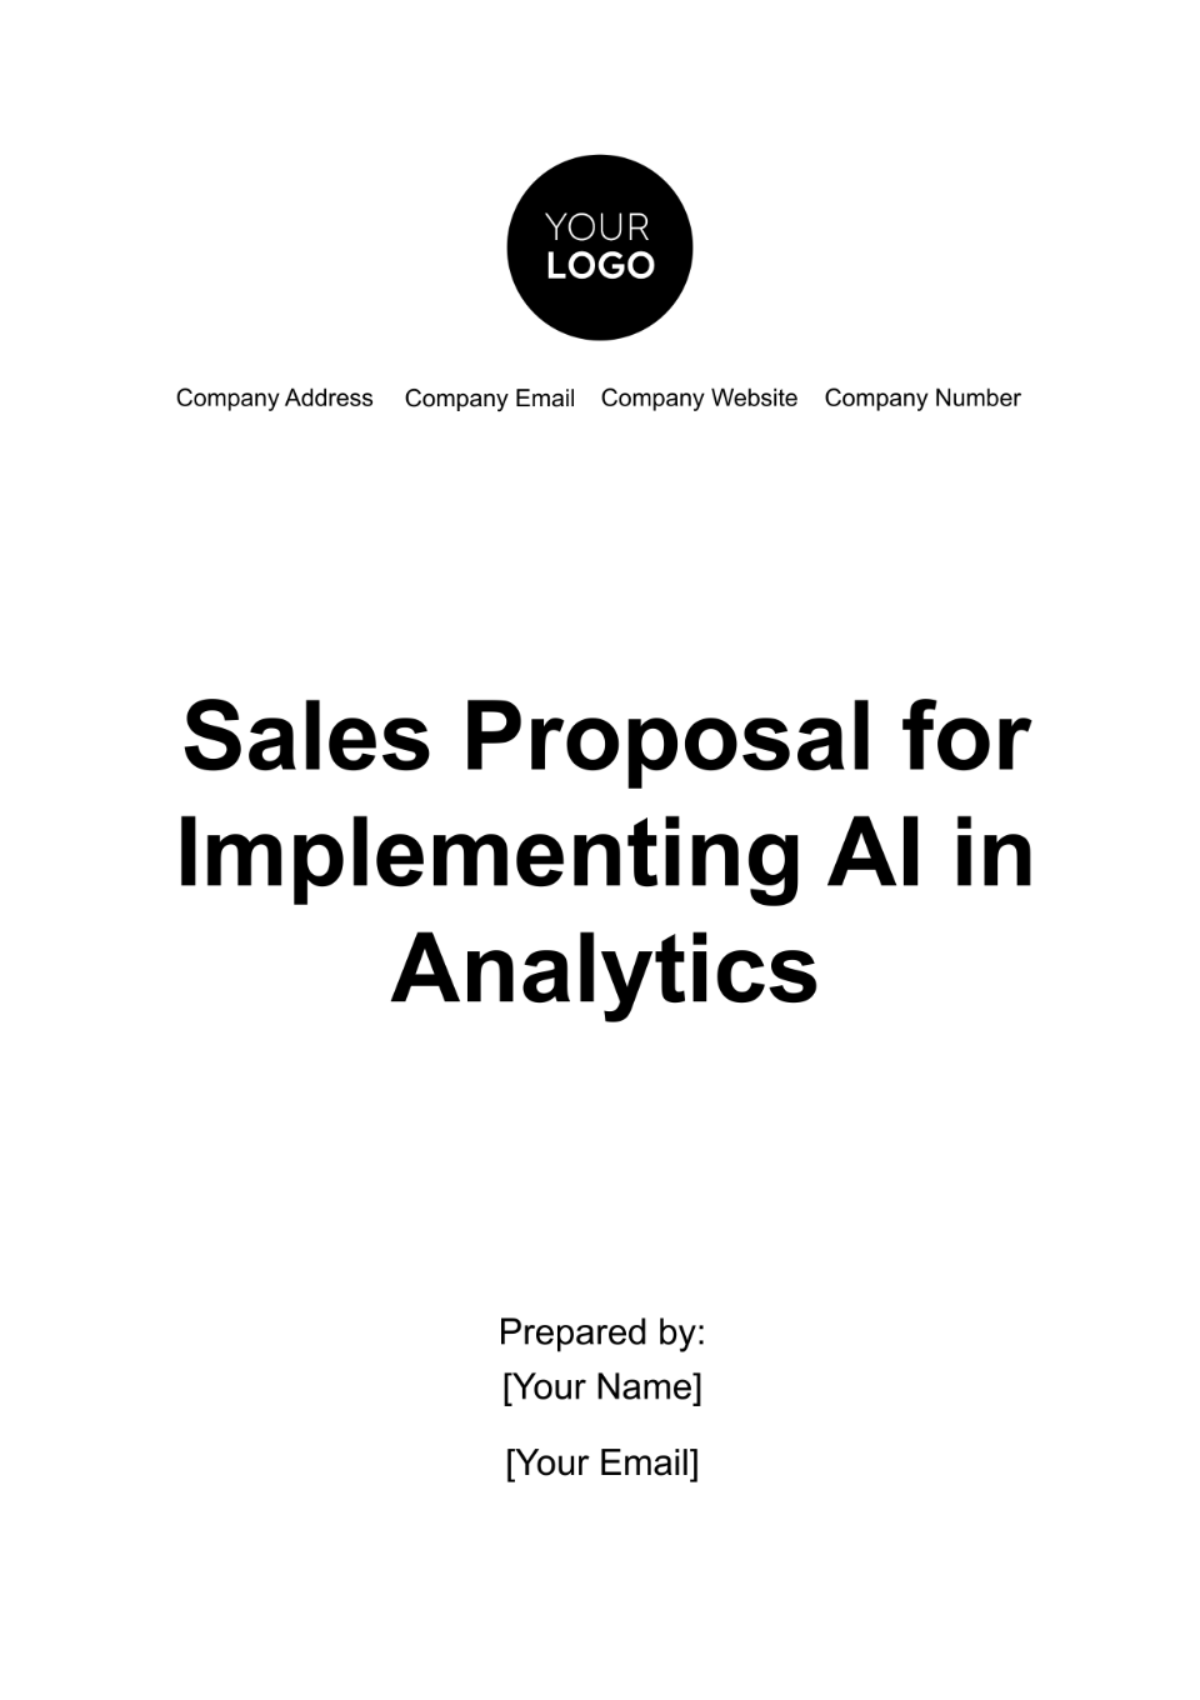 Free Sales Proposal for Implementing AI in Analytics Template